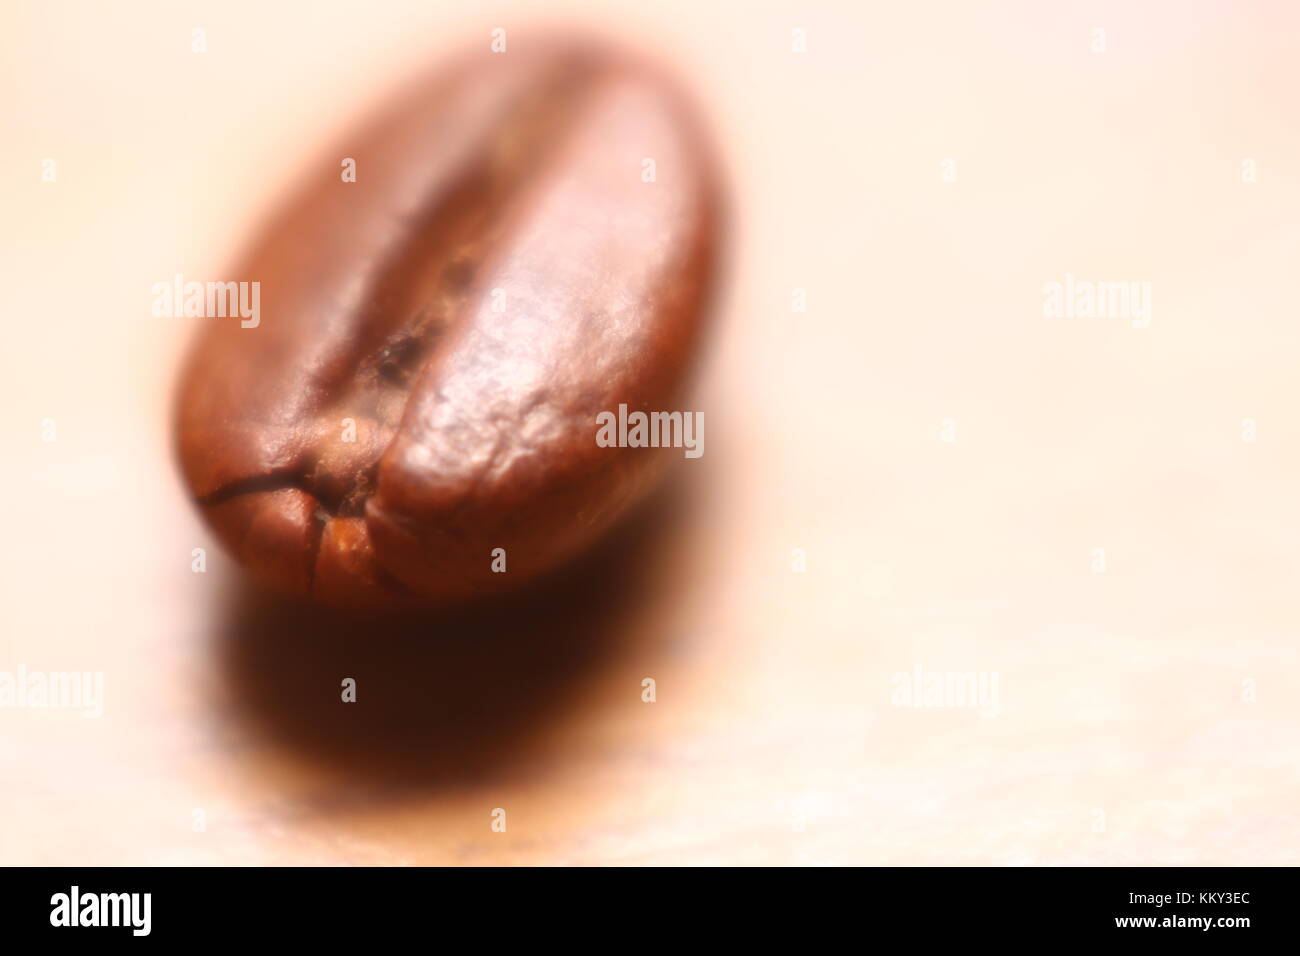 Single coffee bean with high magnification and soft focus effect creating a dream-like mood. Stock Photo